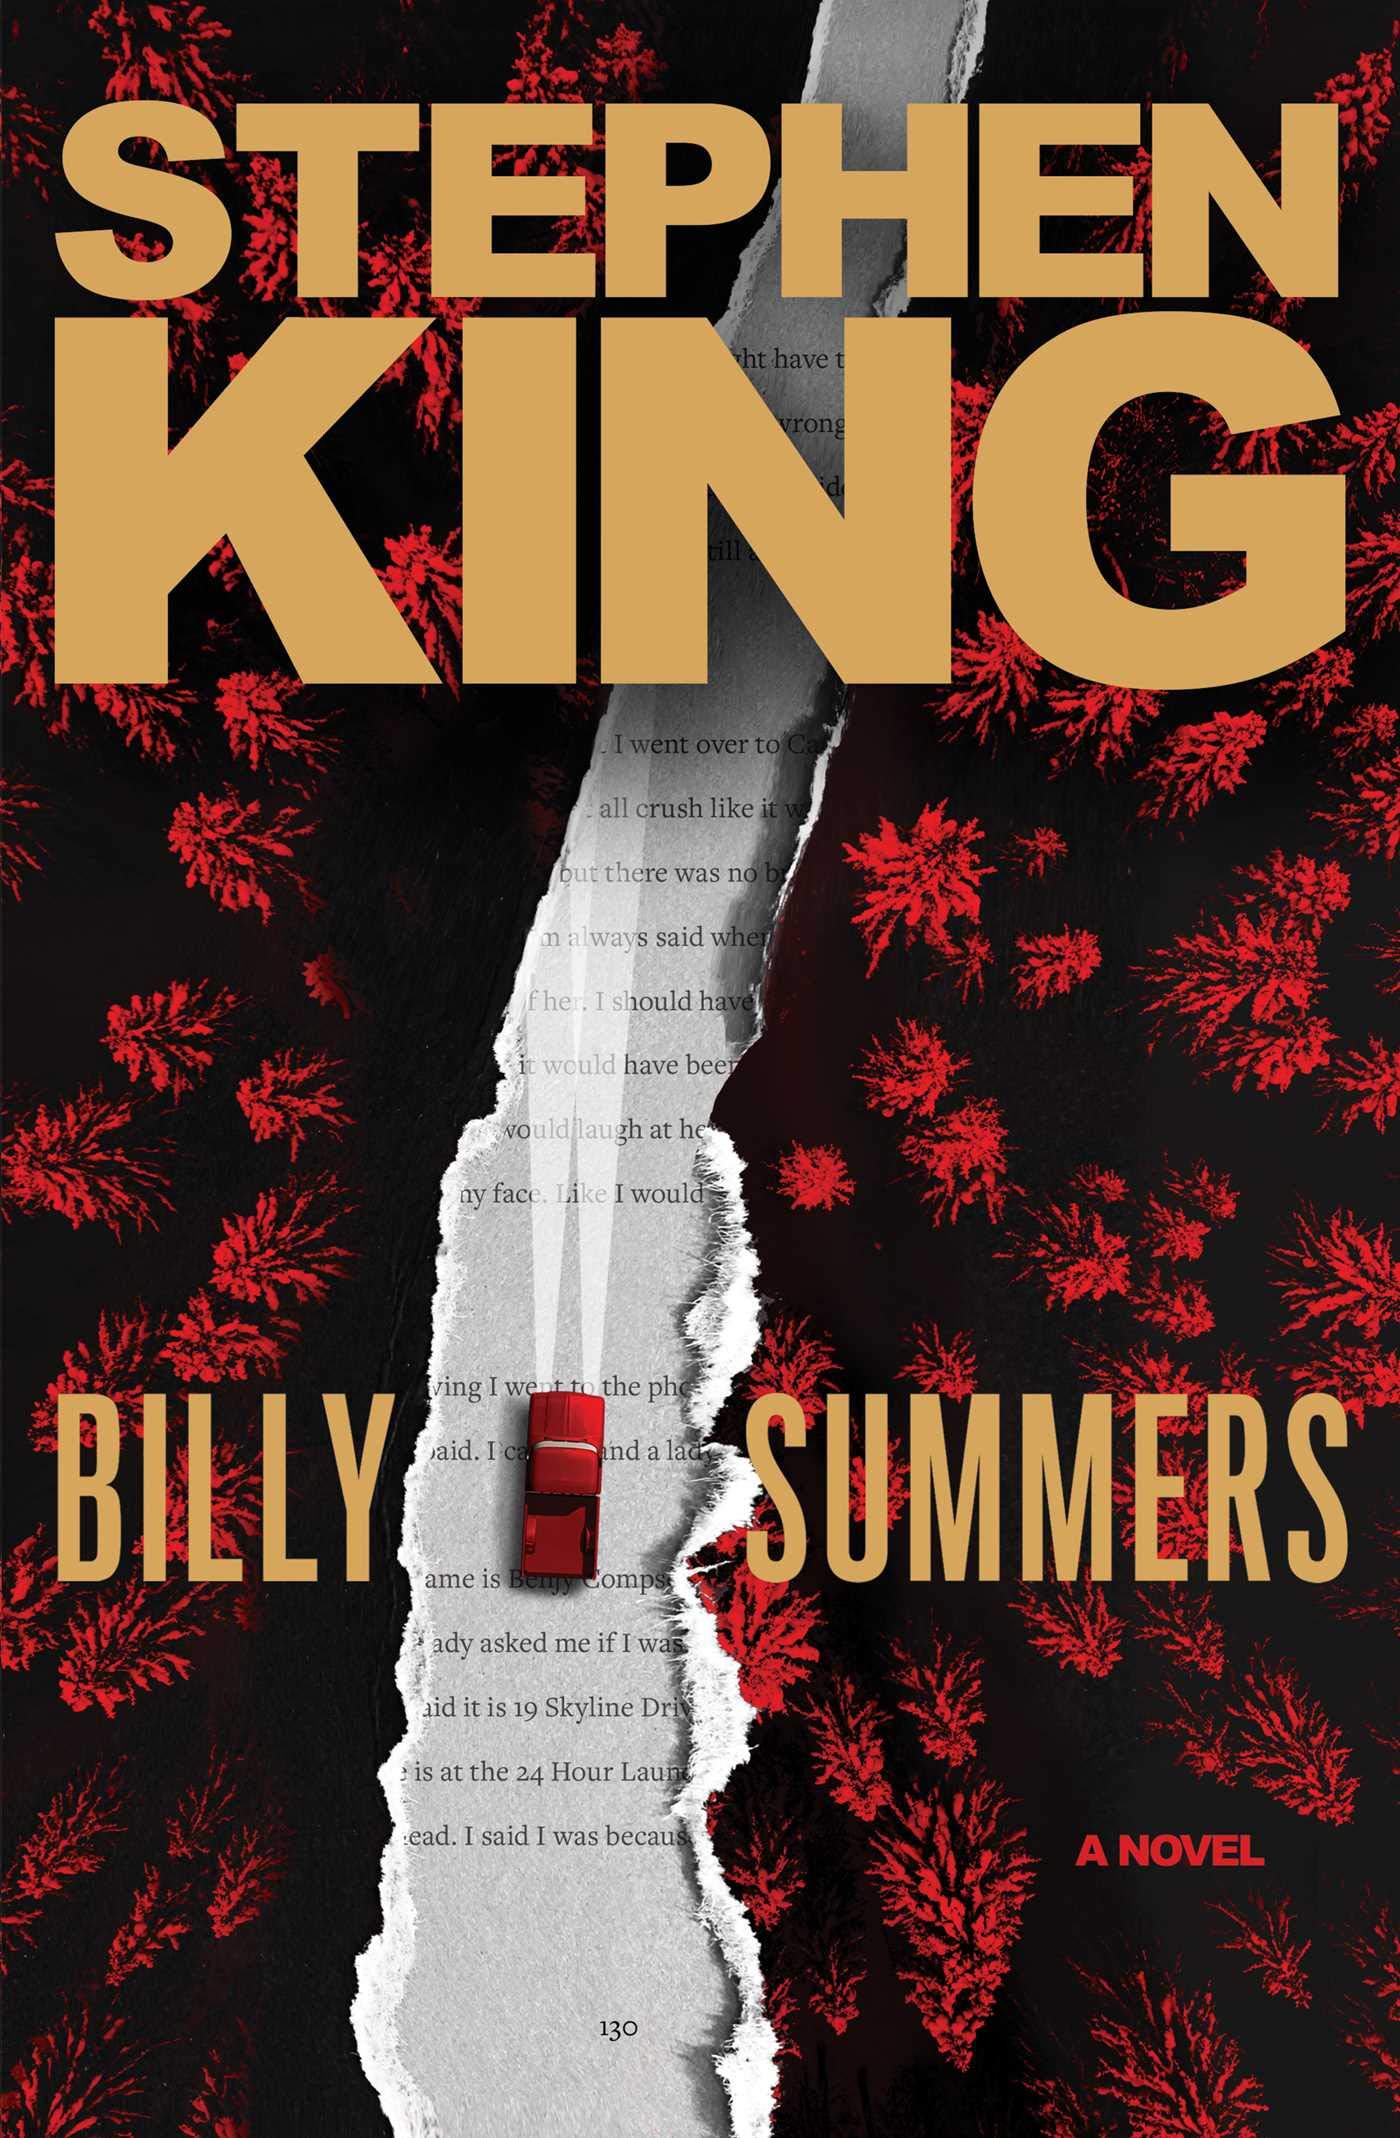 Billy Summers by Stephen King Trade Hardcover